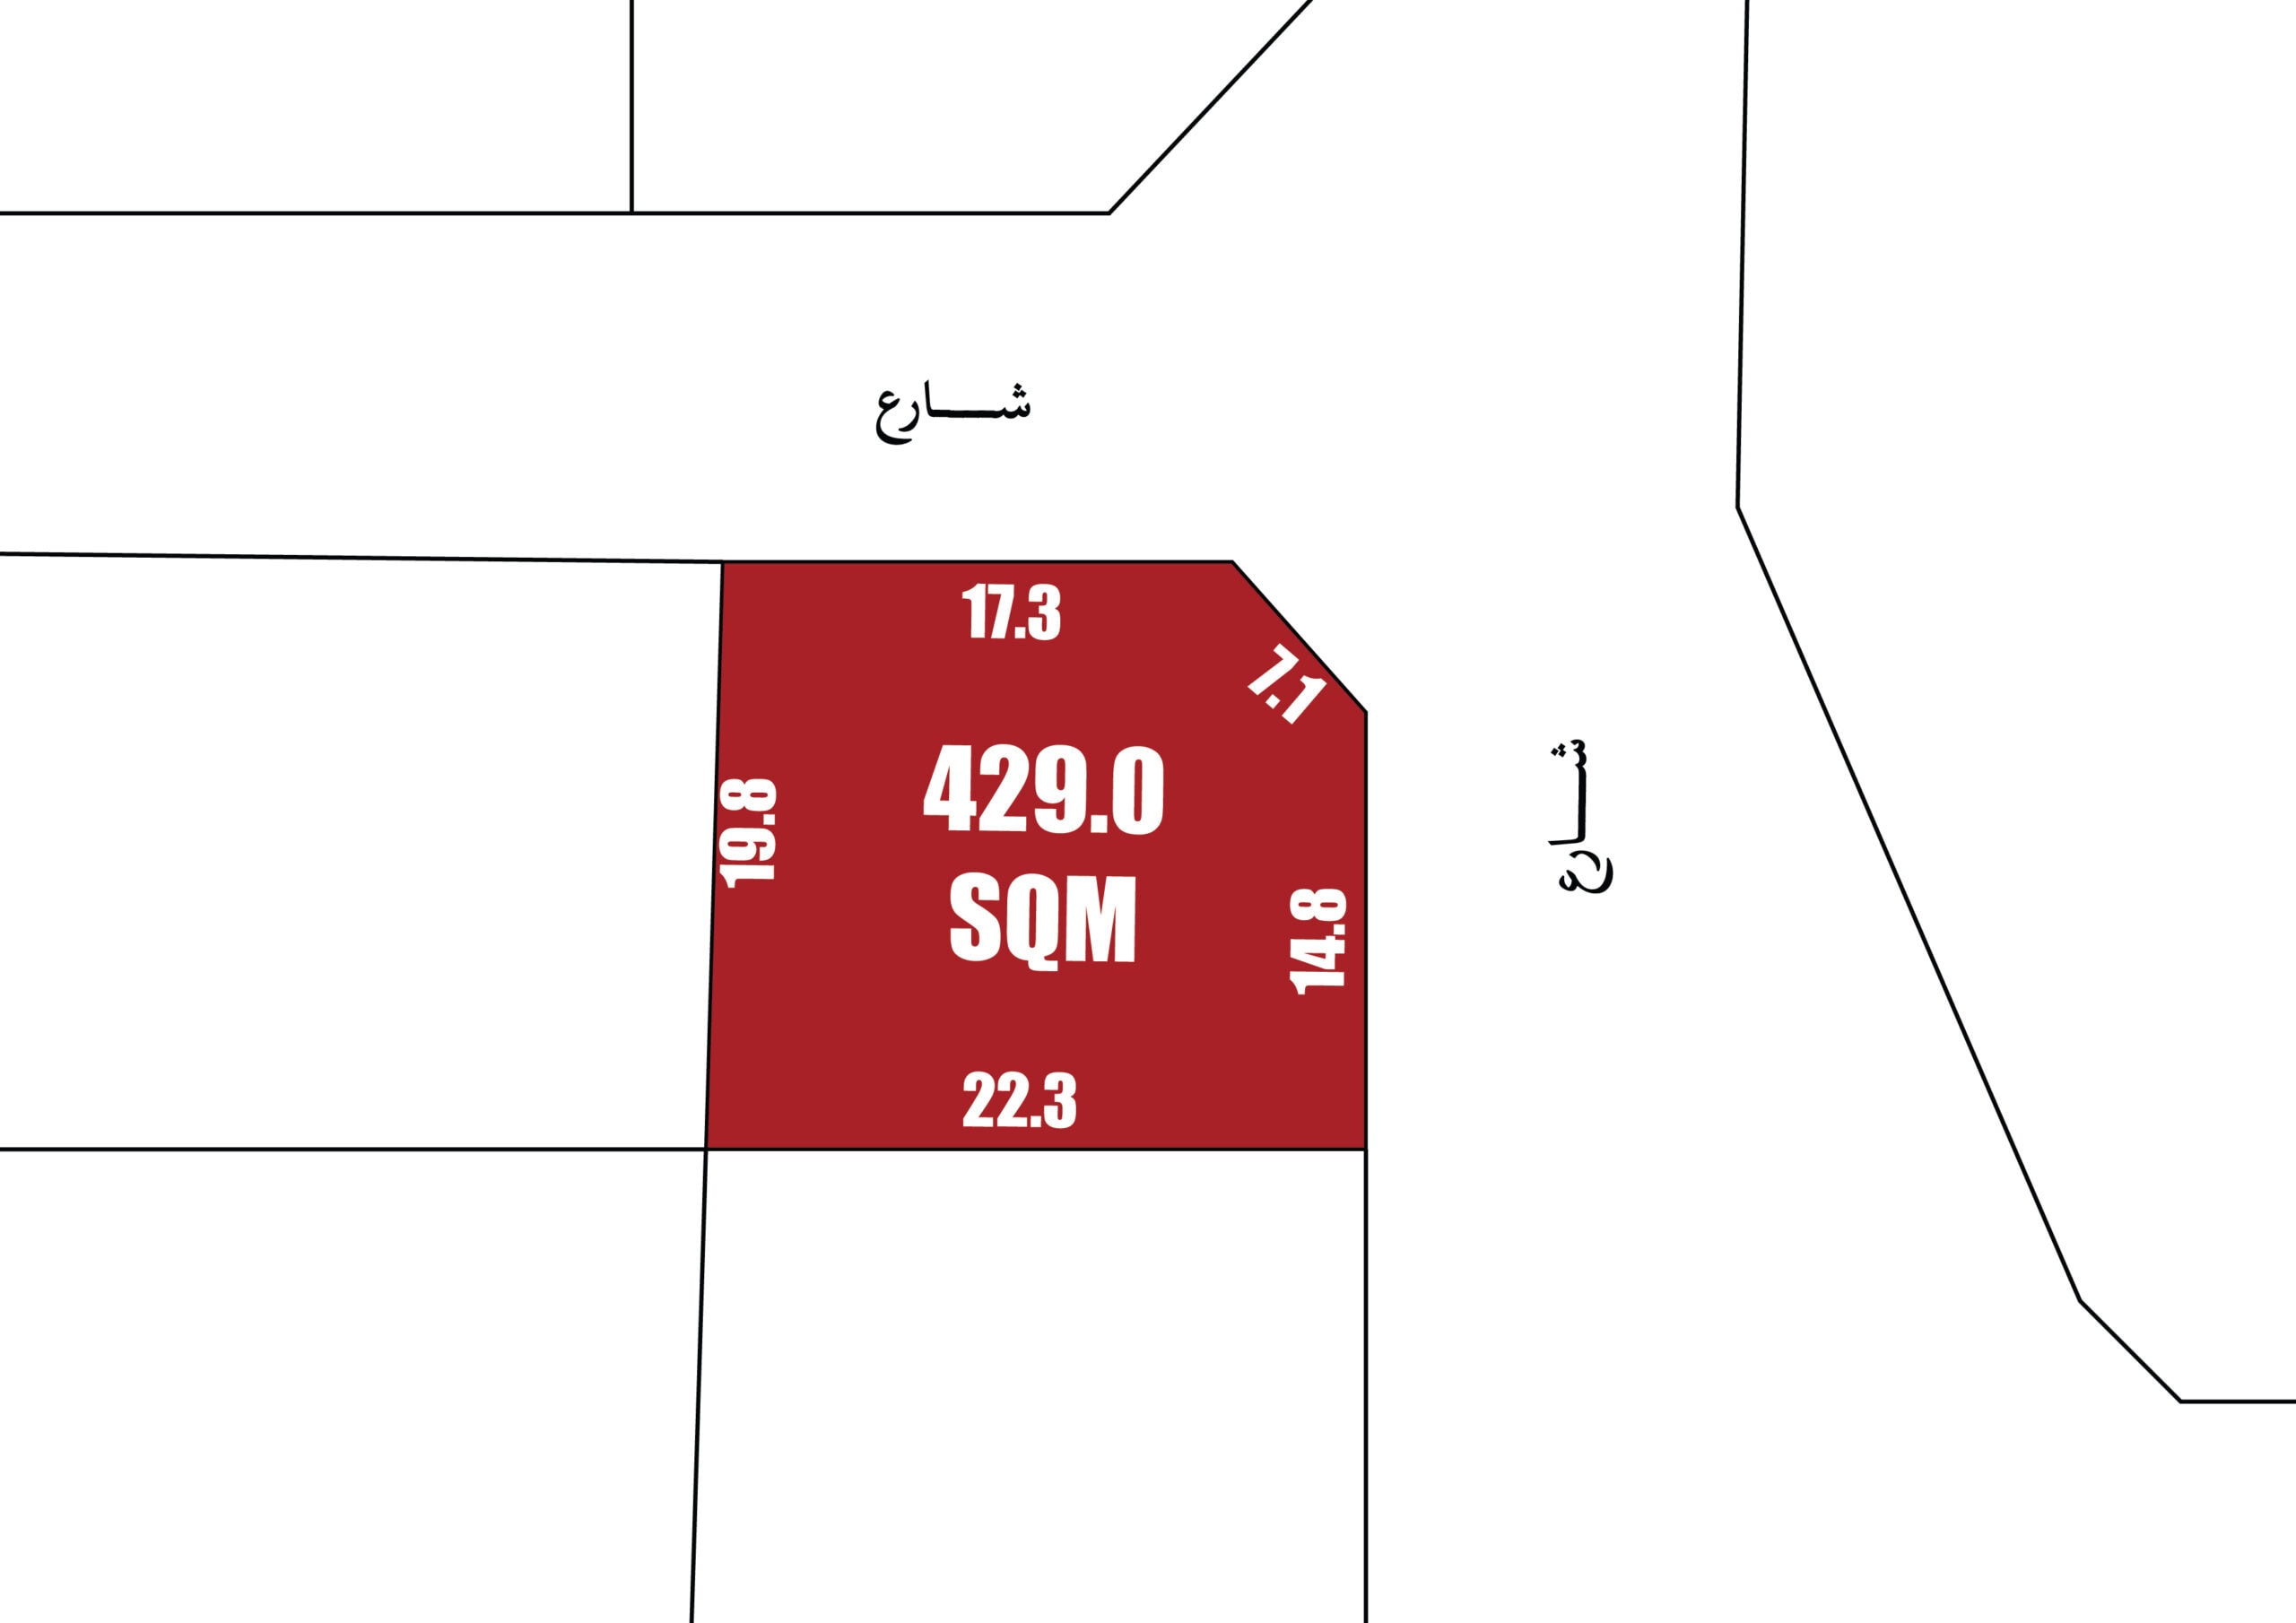 A schematic diagram showing a red-highlighted residential land plot labeled with measurements 